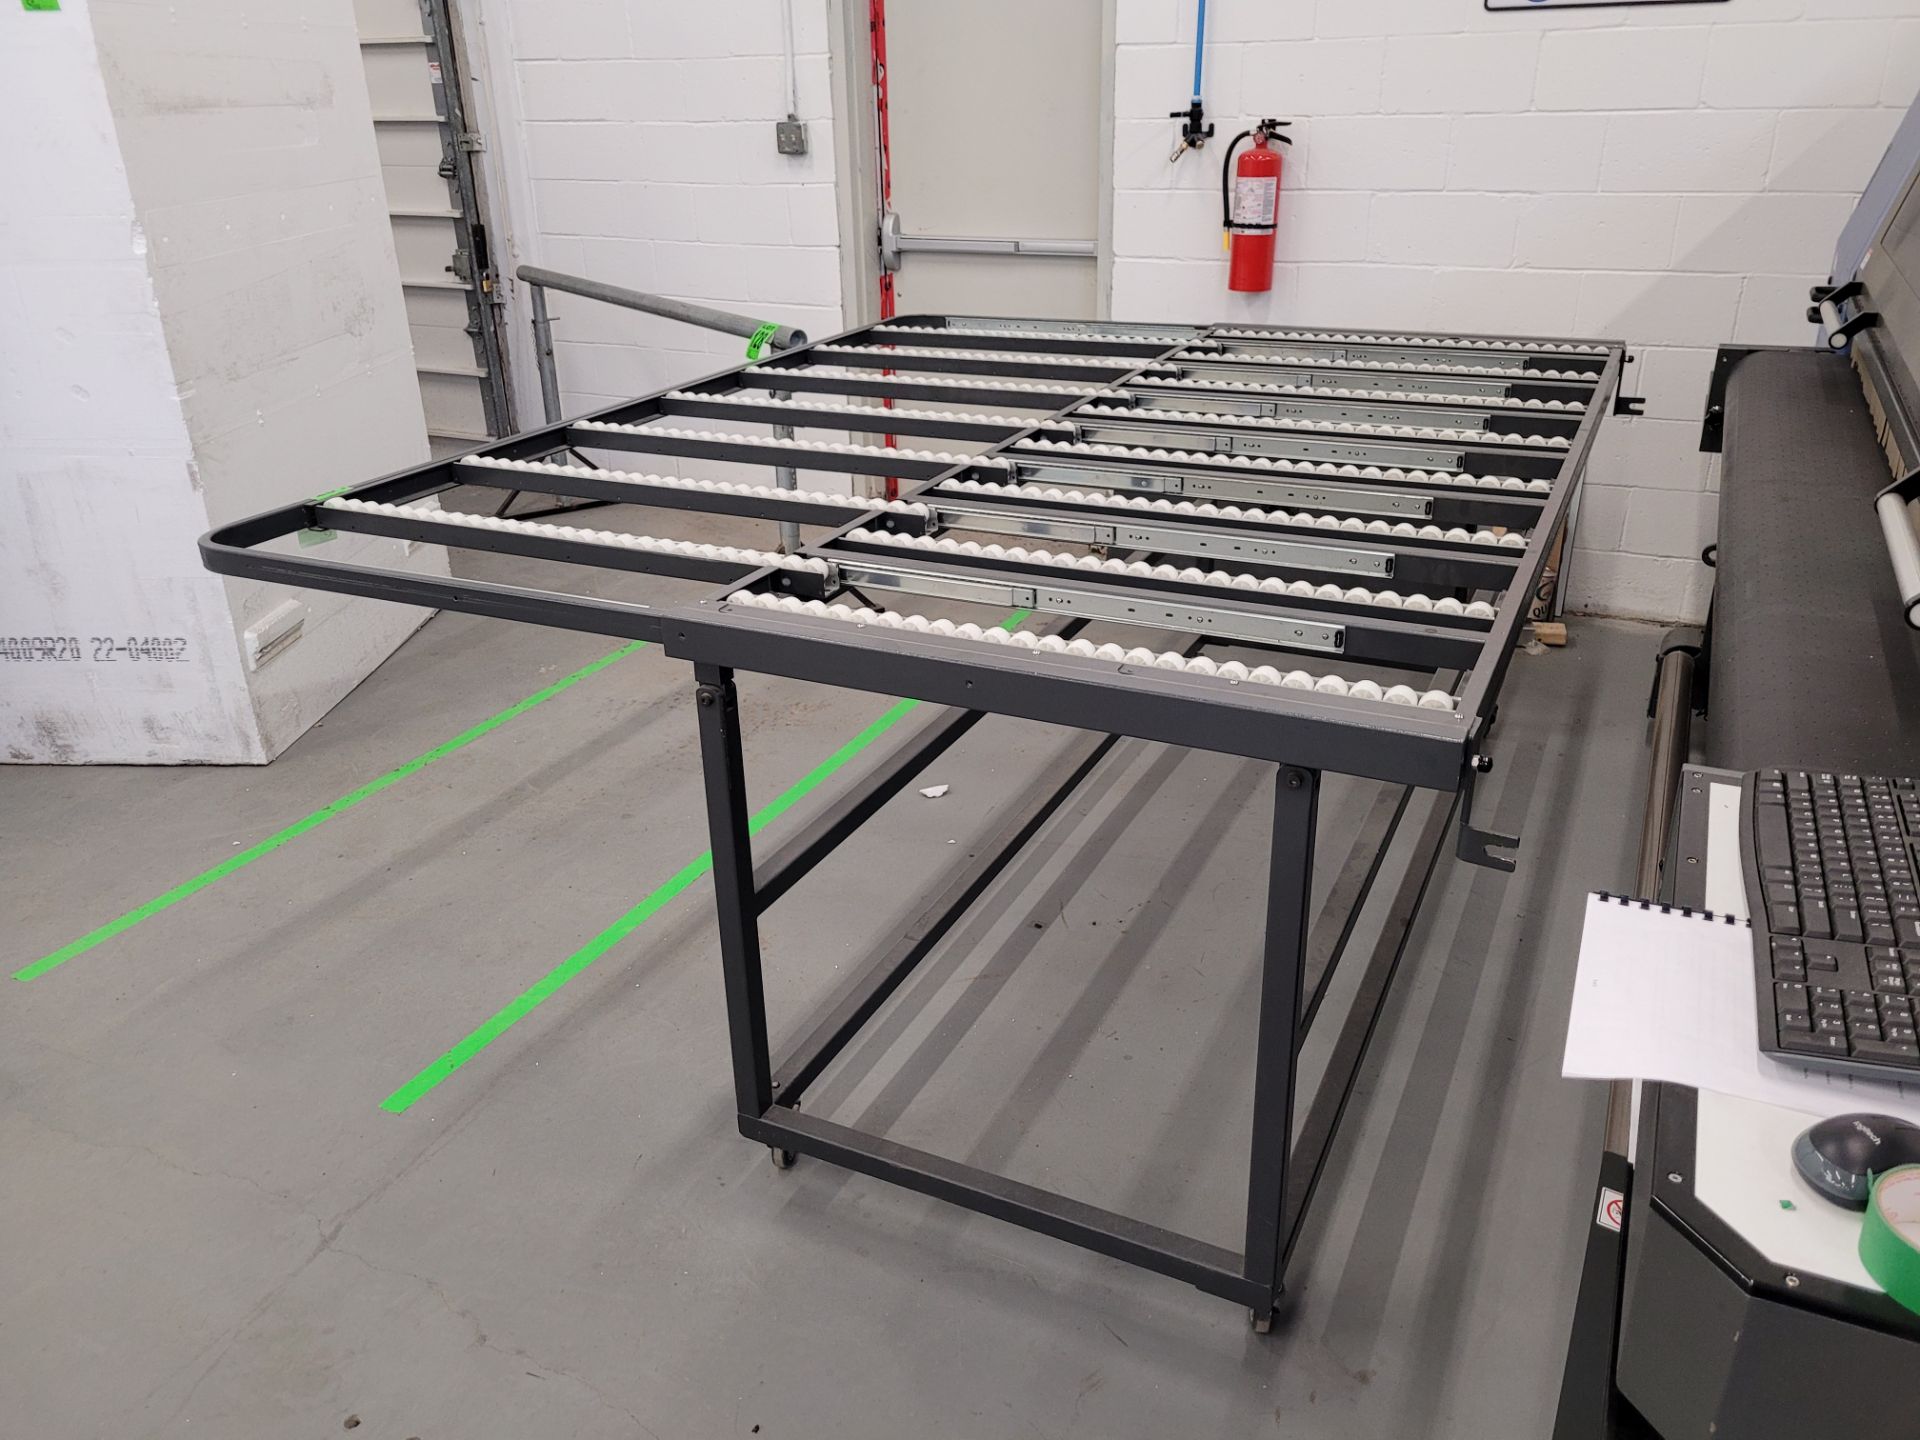 Extendable entry/exit roller conveyor on casters, 92" x 45" x 38" (up to 75") - Image 4 of 4